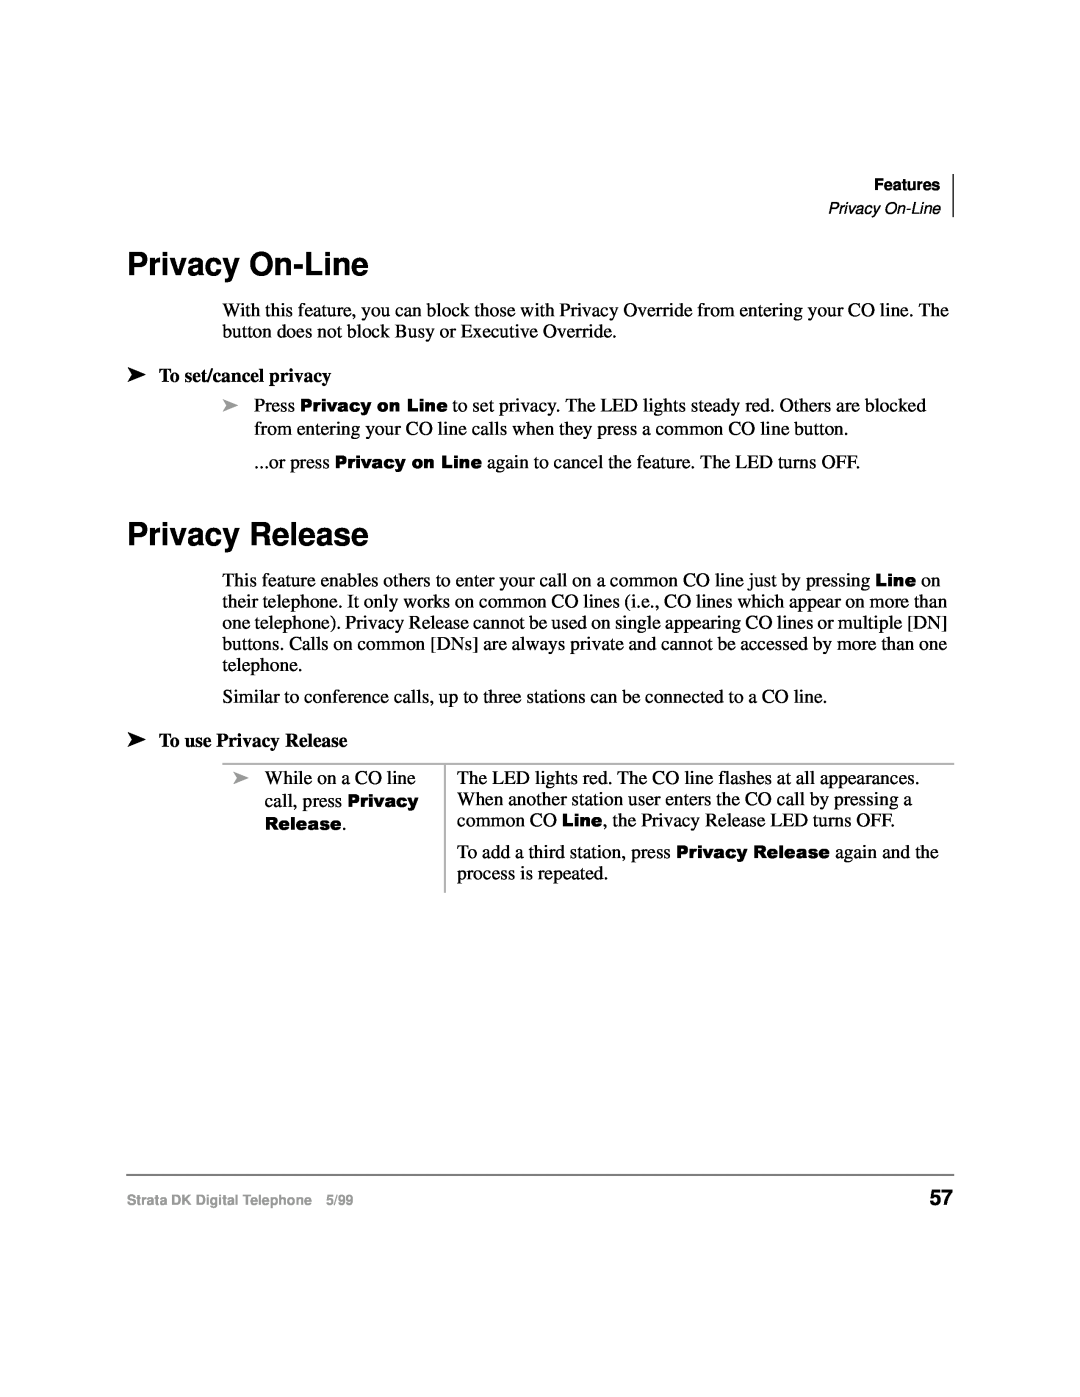 Toshiba CT manual Privacy On-Line, To set/cancel privacy, To use Privacy Release 